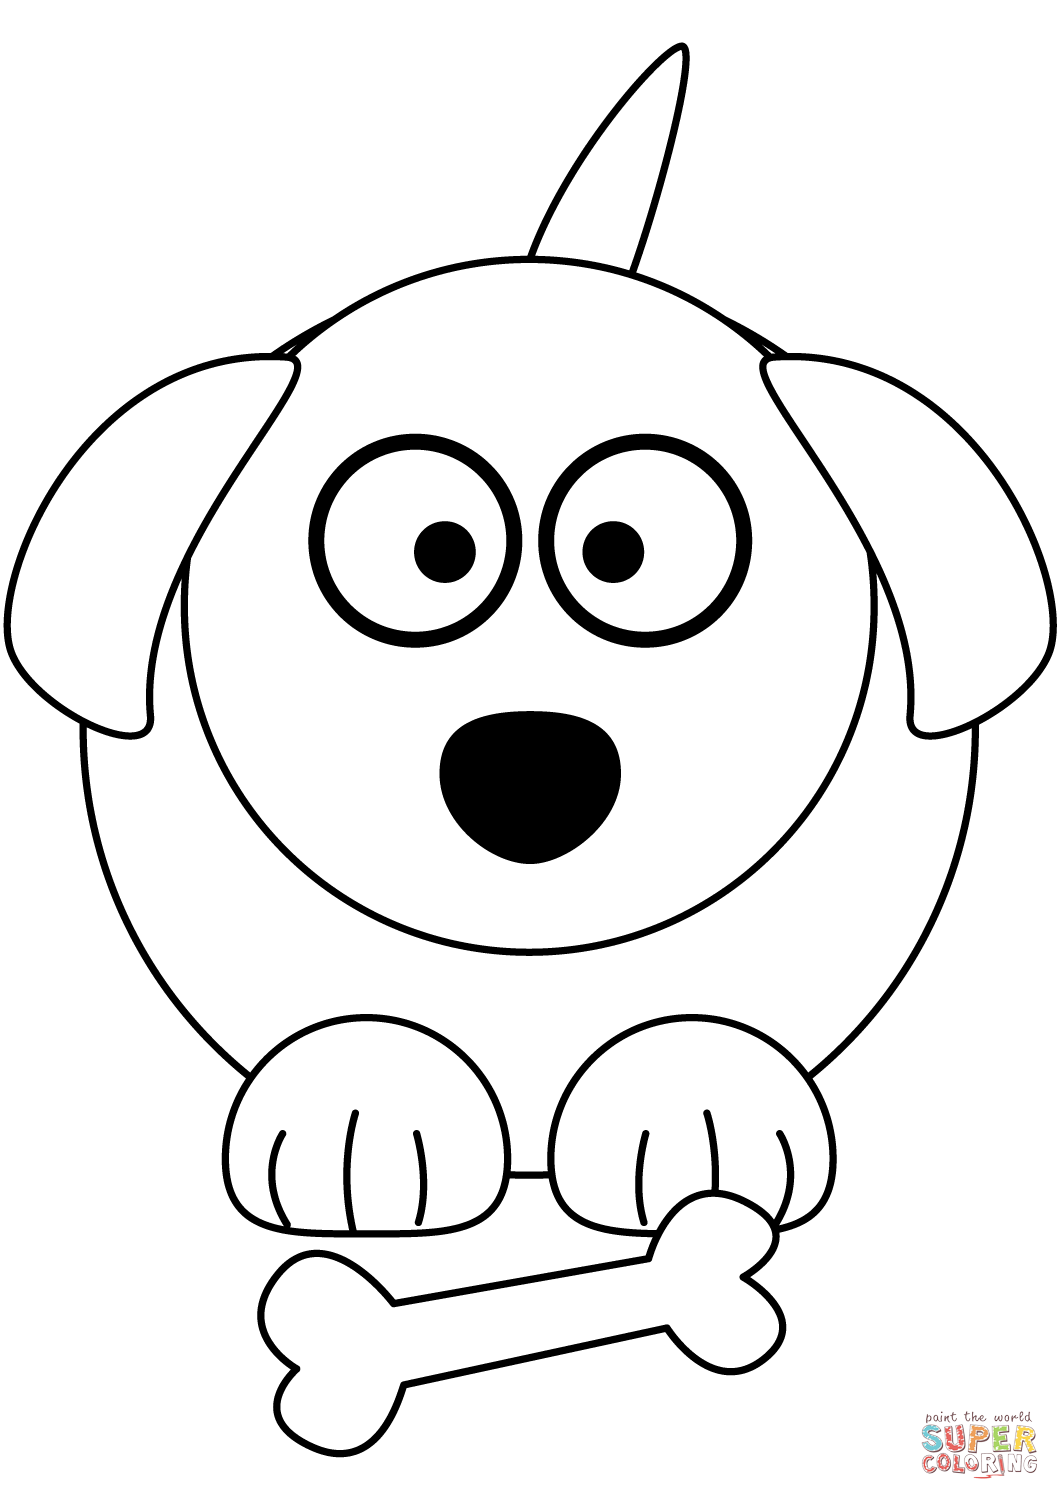 Funny dog with bone coloring page free printable coloring pages